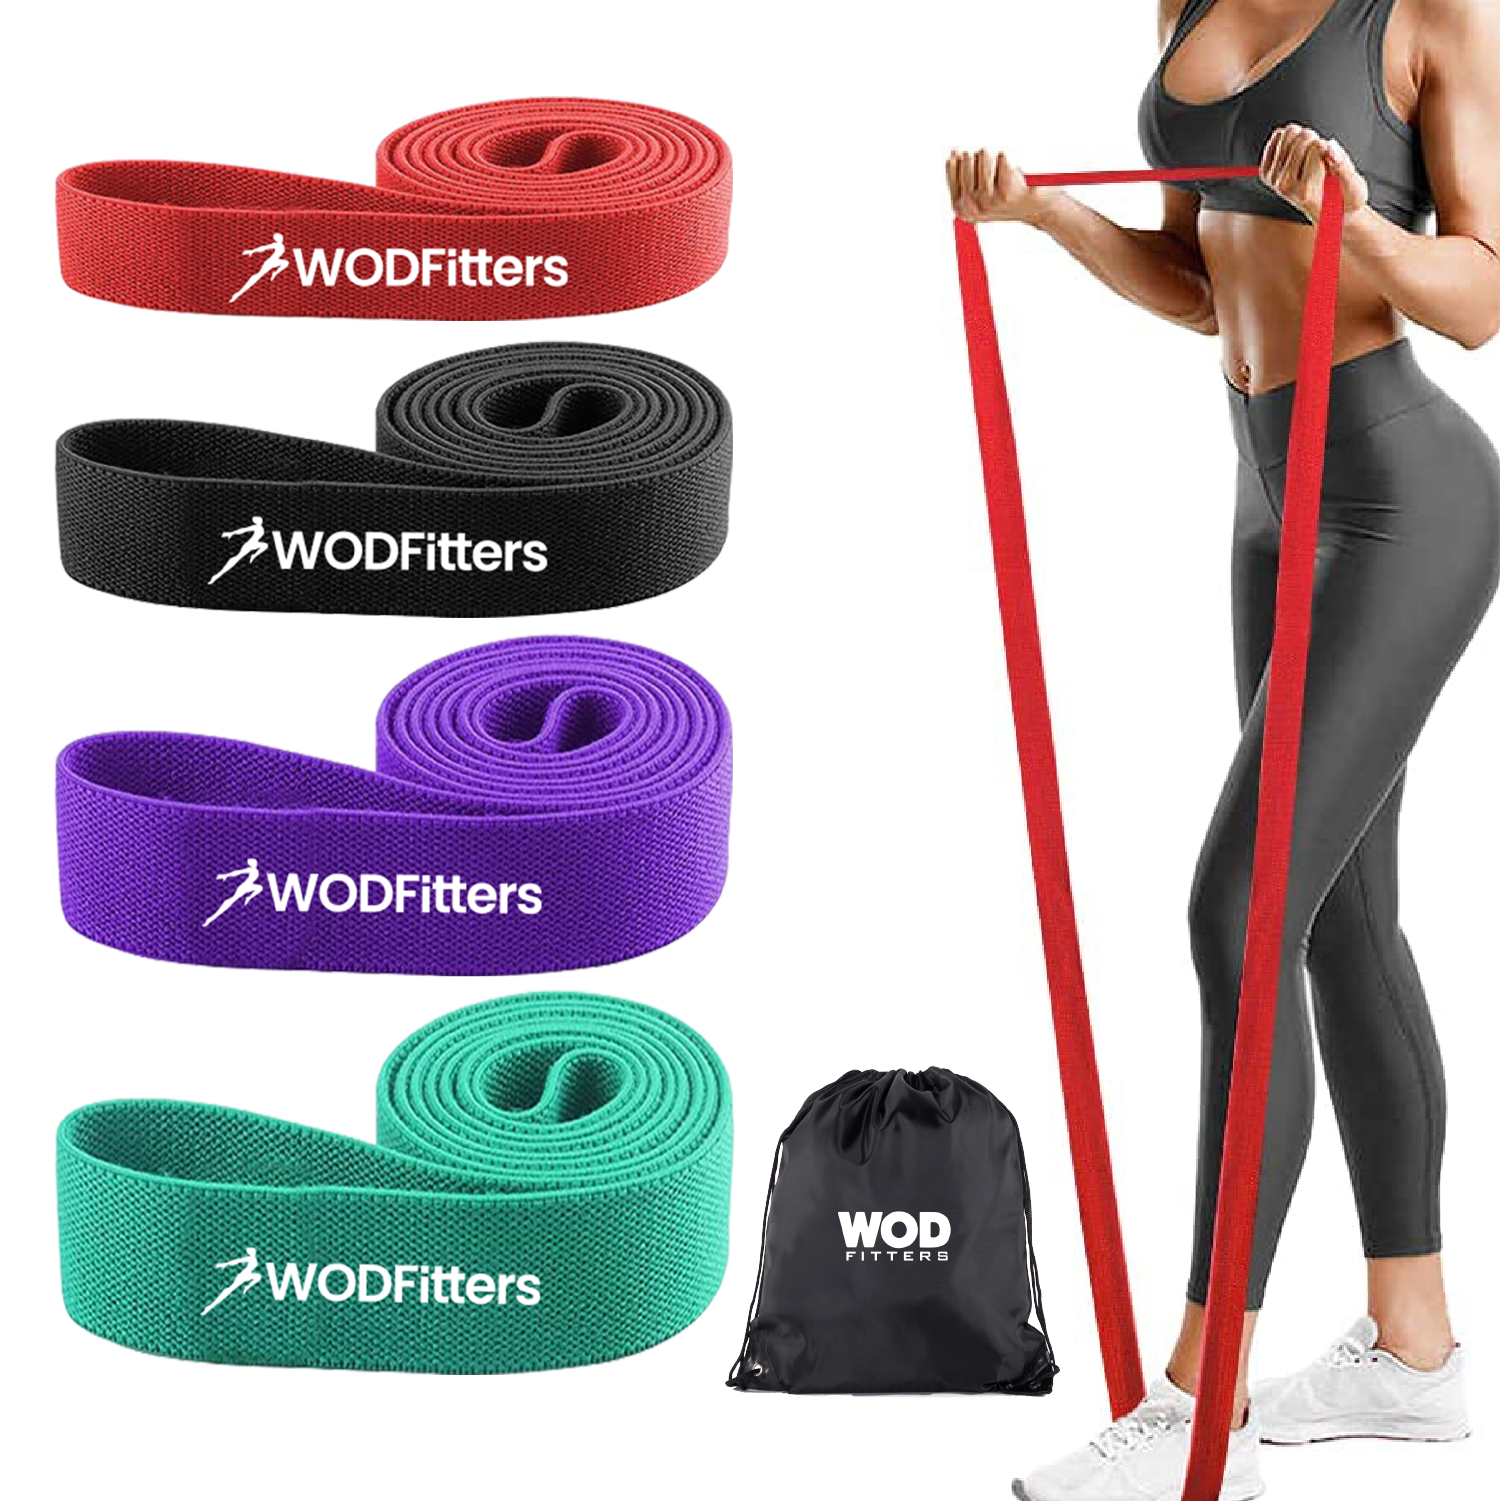 WODFitters Fabric Pull Up Resistance Bands - 4 Band Set - Set of 4 Fab